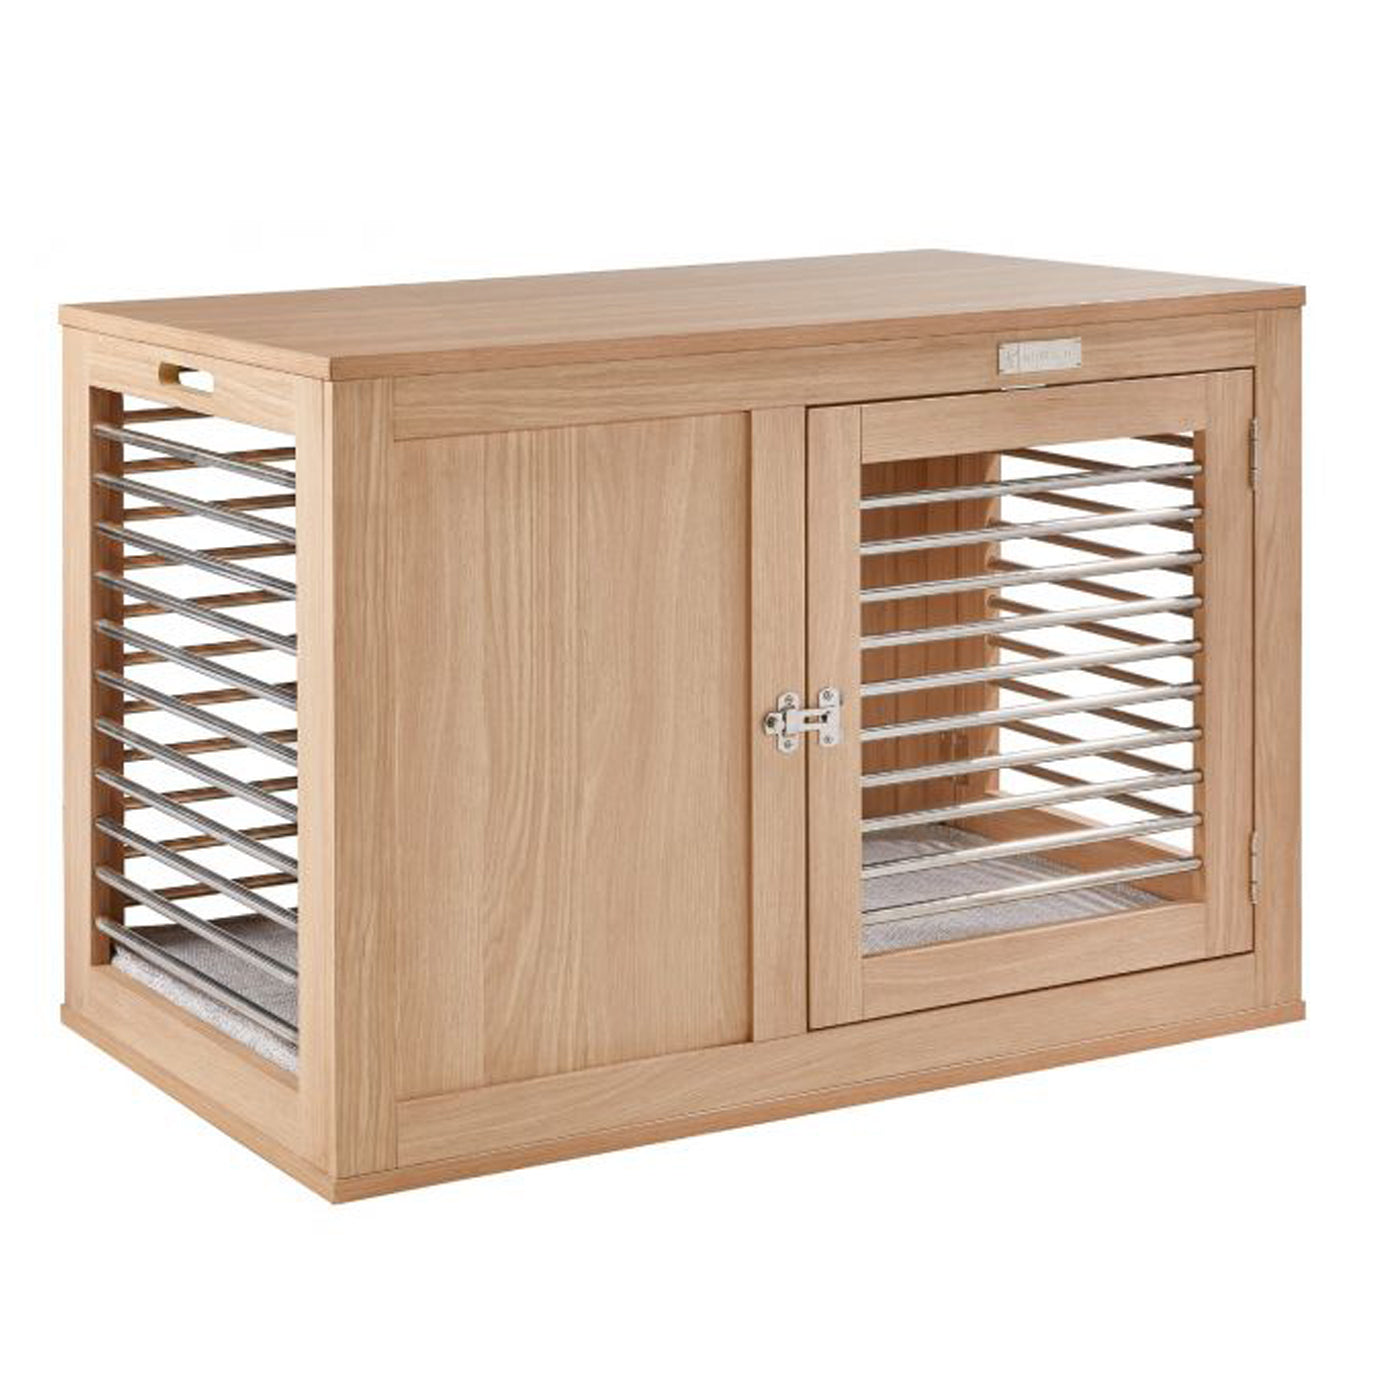 Modern looking wooden dog crate with 2 doors made of steel bars